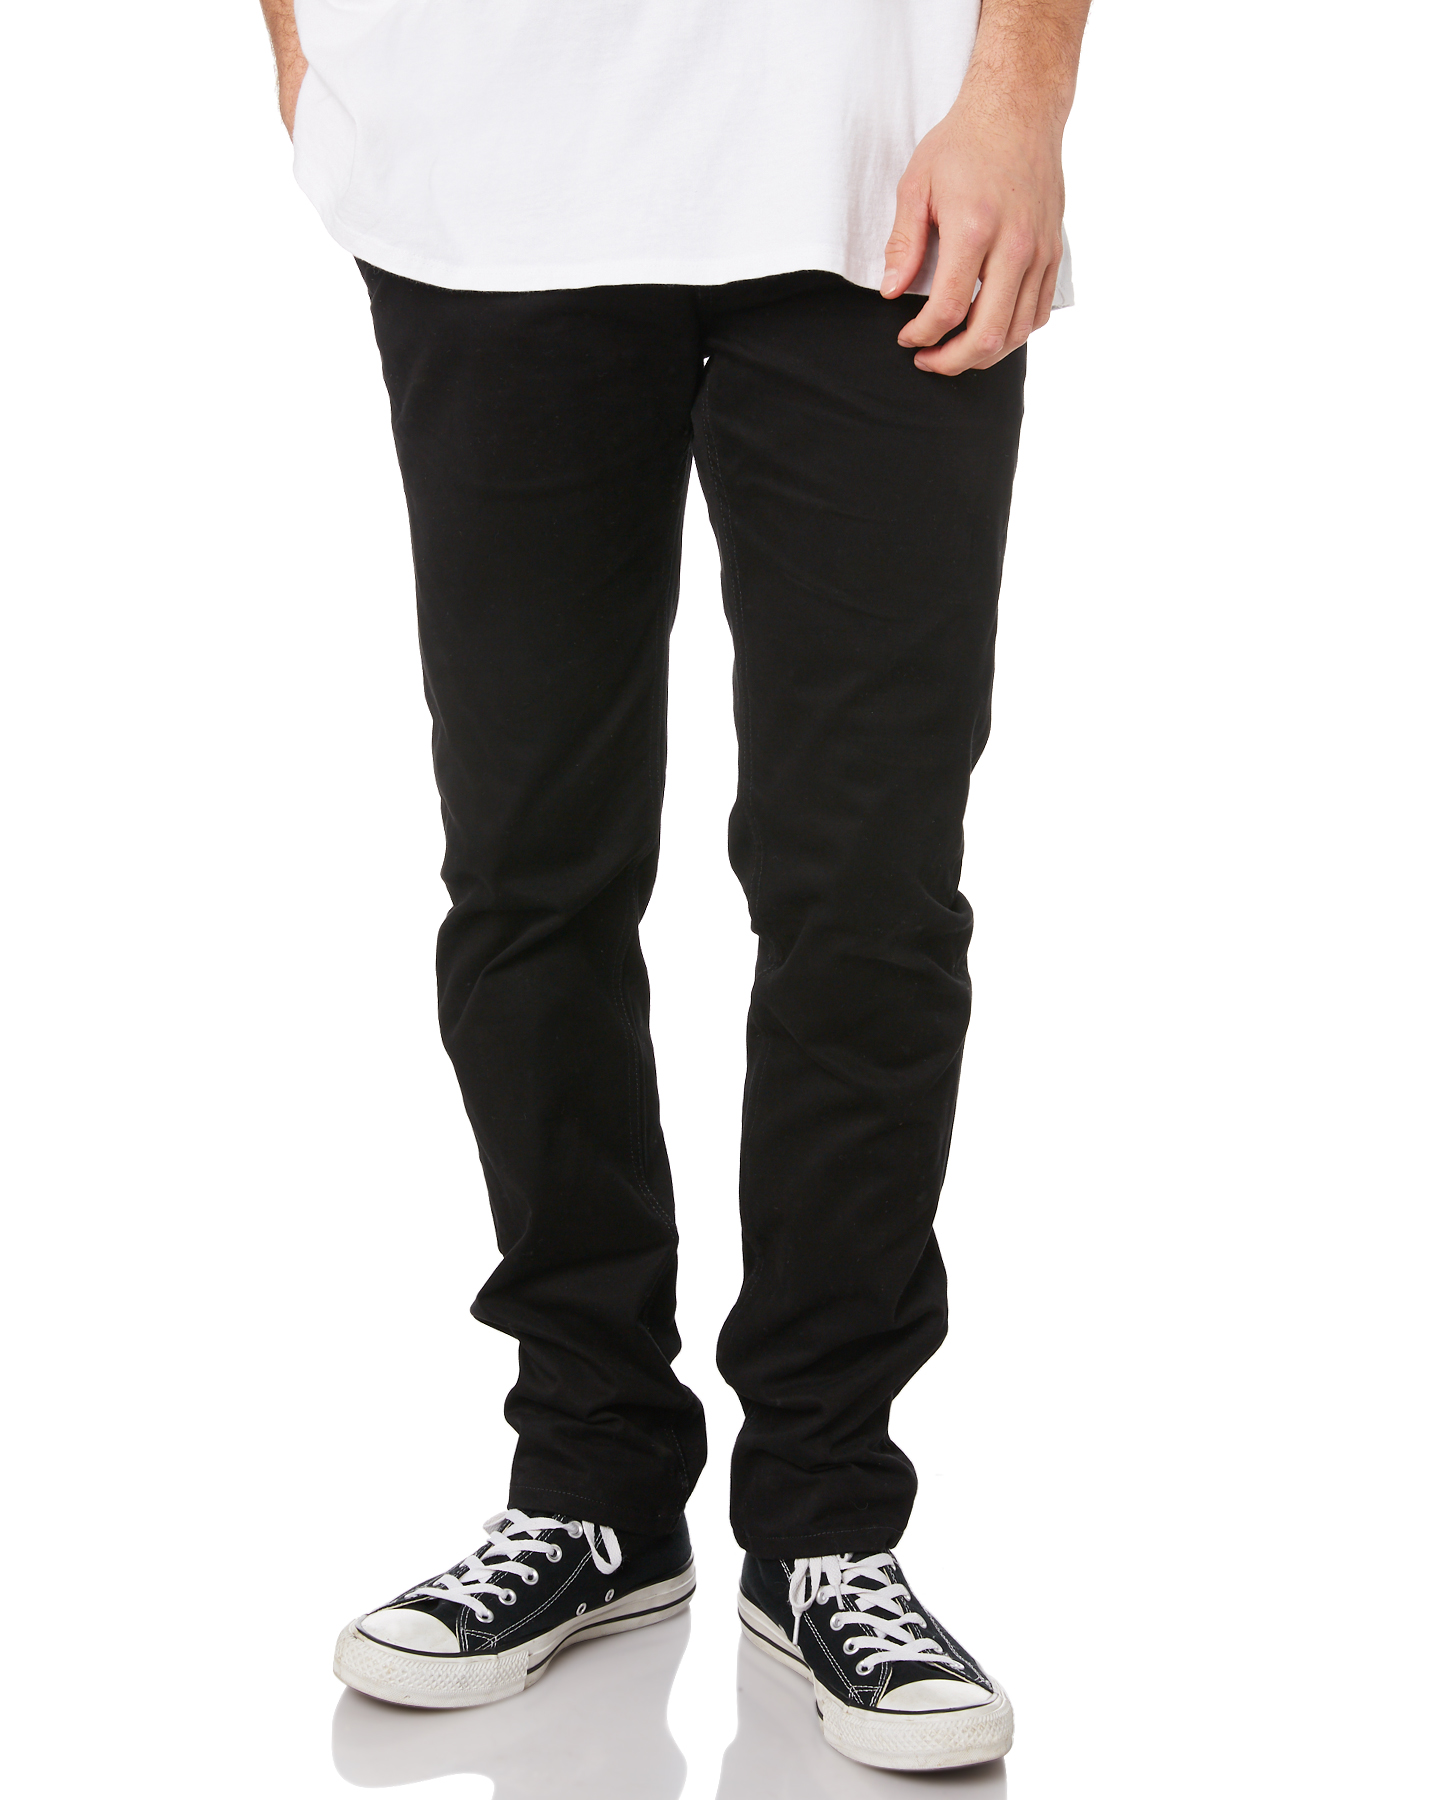 Imperial Motion Capital Slim Fit Mens Chino Pant - Black | SurfStitch